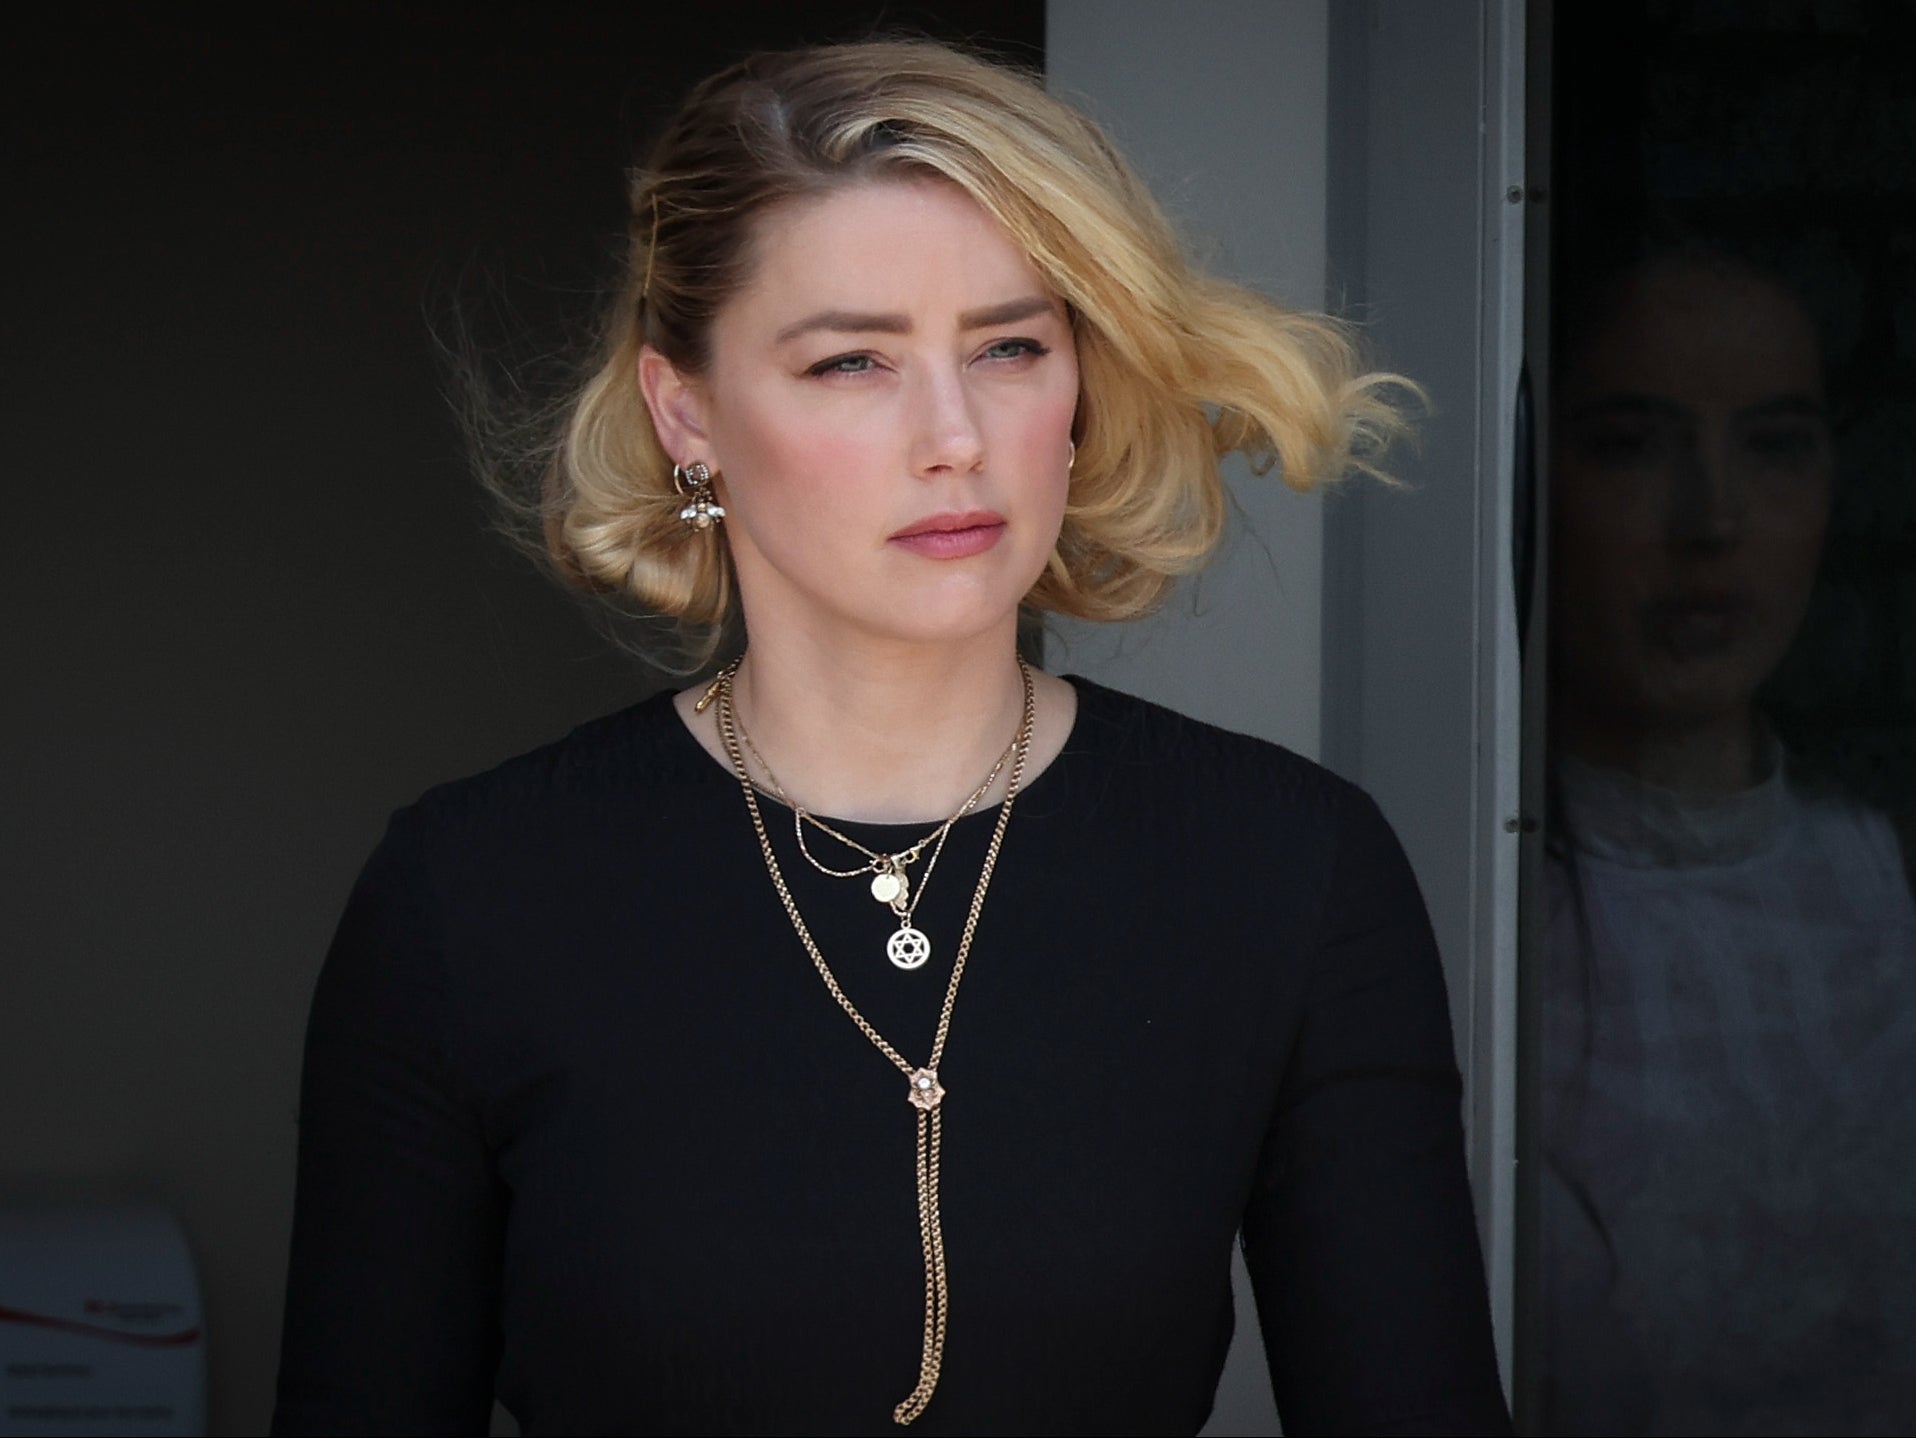 Amber Heard departs the Fairfax County Courthouse on 1 June 2022 in Fairfax, Virginia